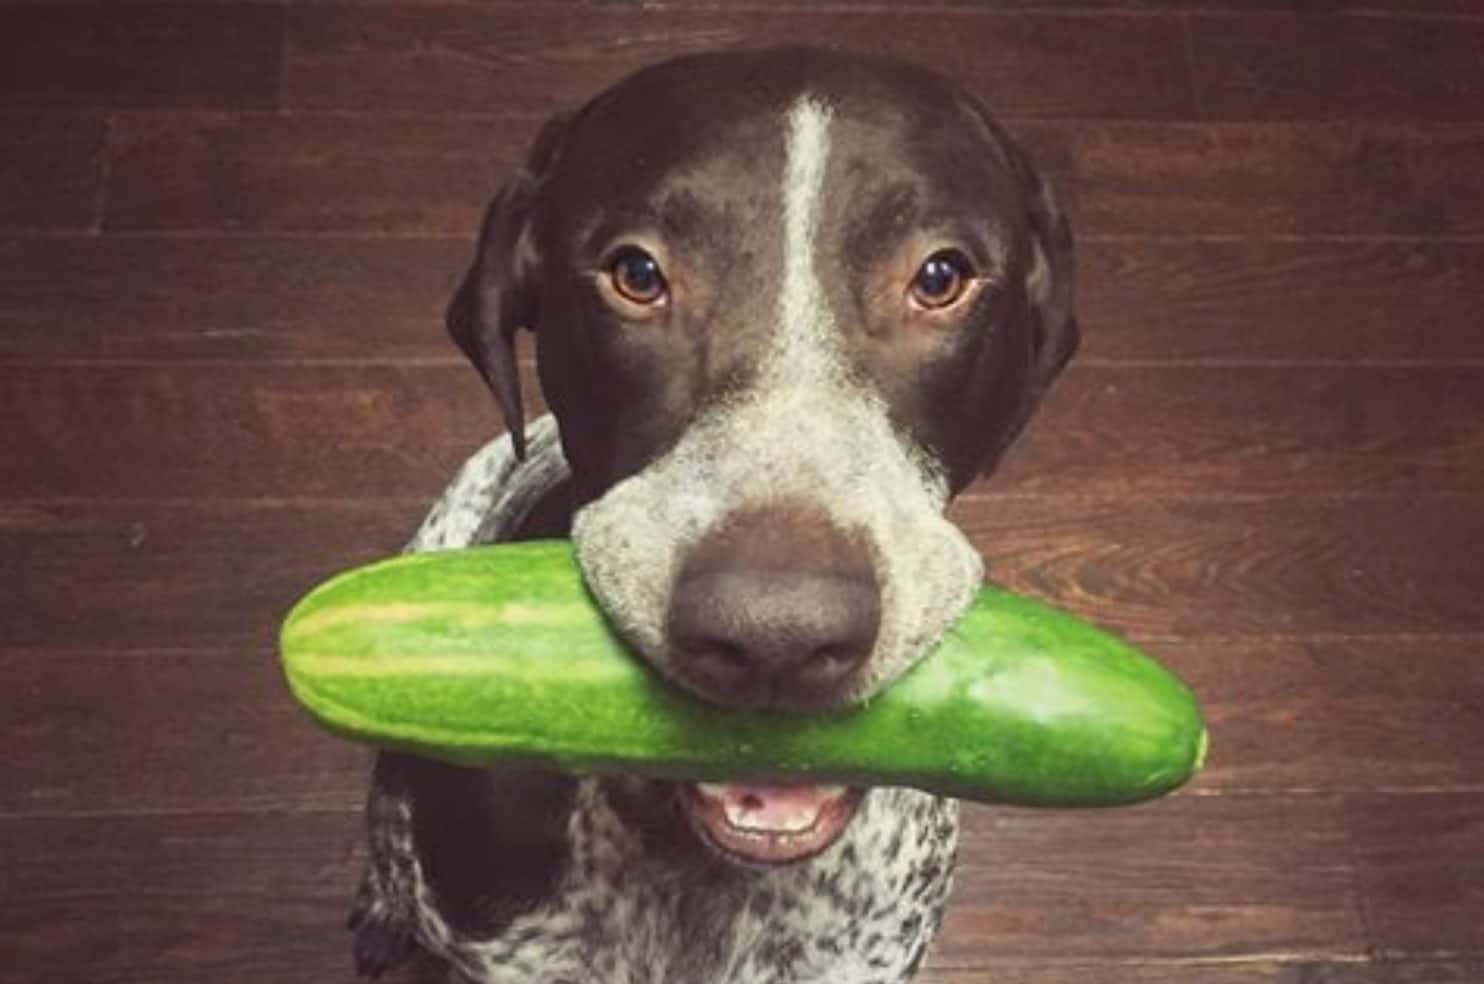 There are certain risks and side effects when feeding dogs cucumbers.